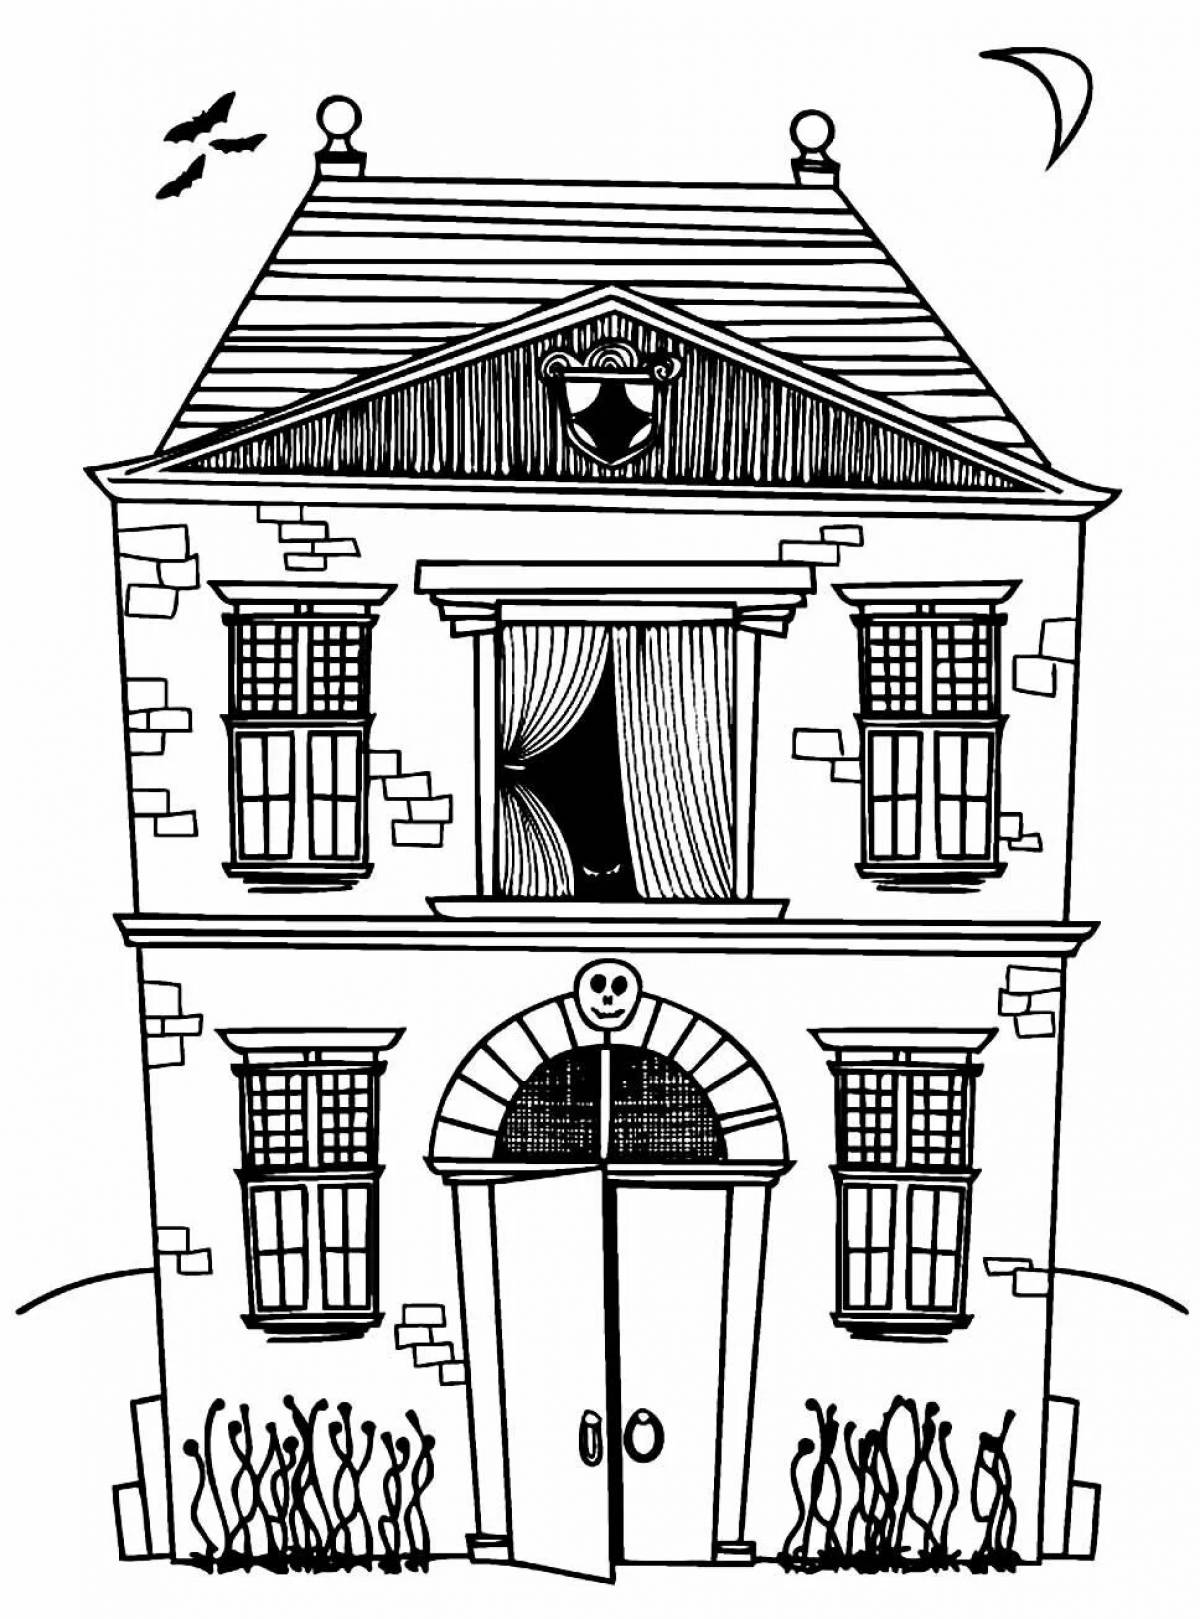 Coloring page of an unfriendly abandoned house